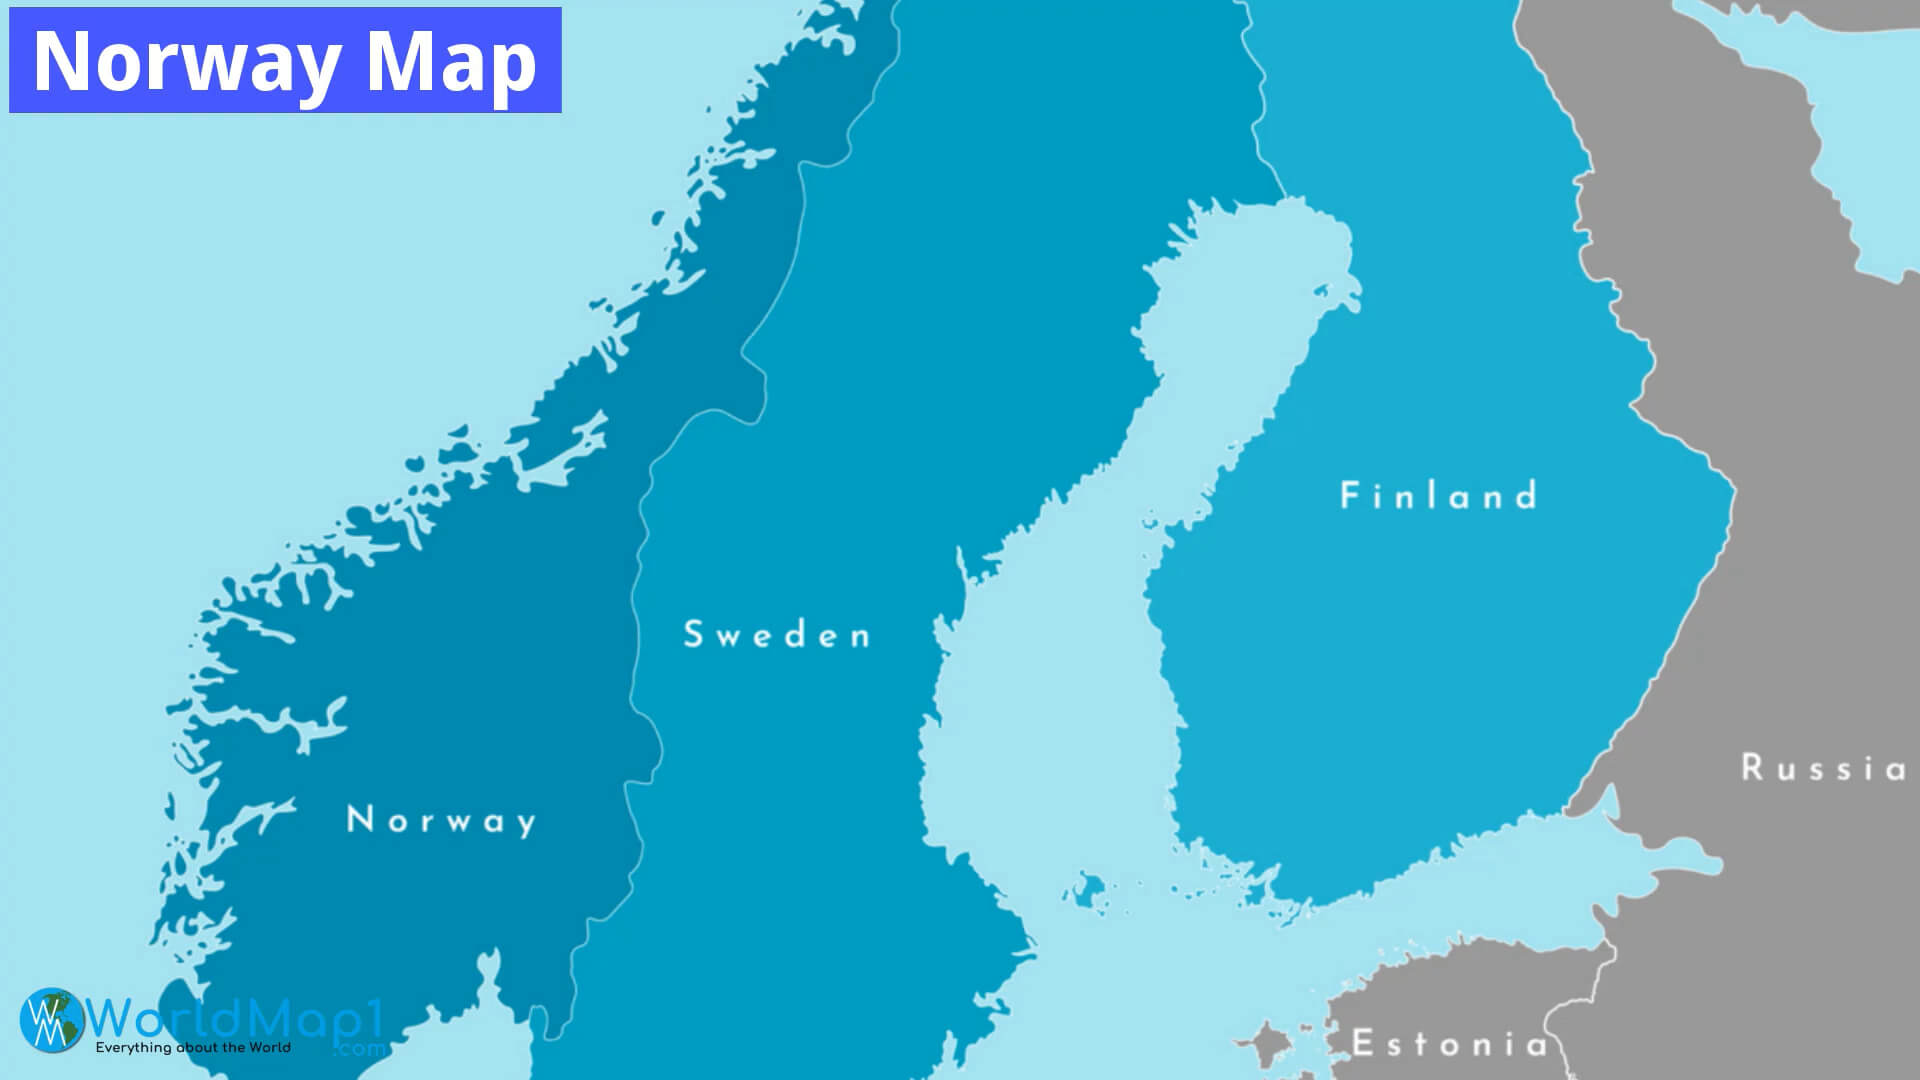 Norway Map with Scandinivian Countries